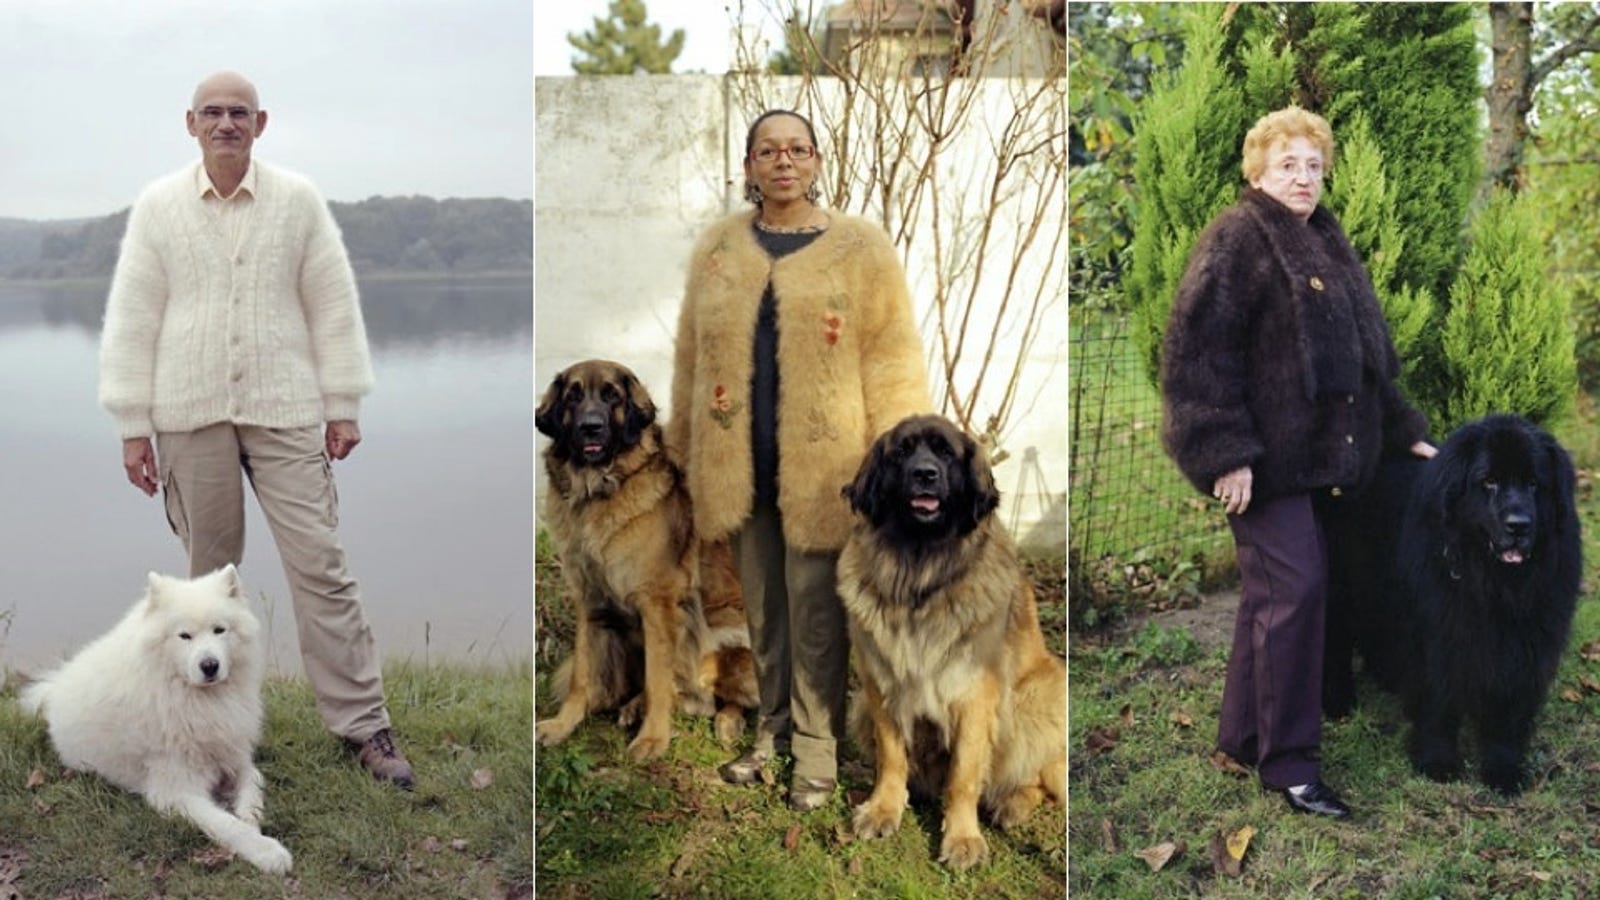 See My Vest: Portraits of Pet Owners in Dog Hair Sweaters